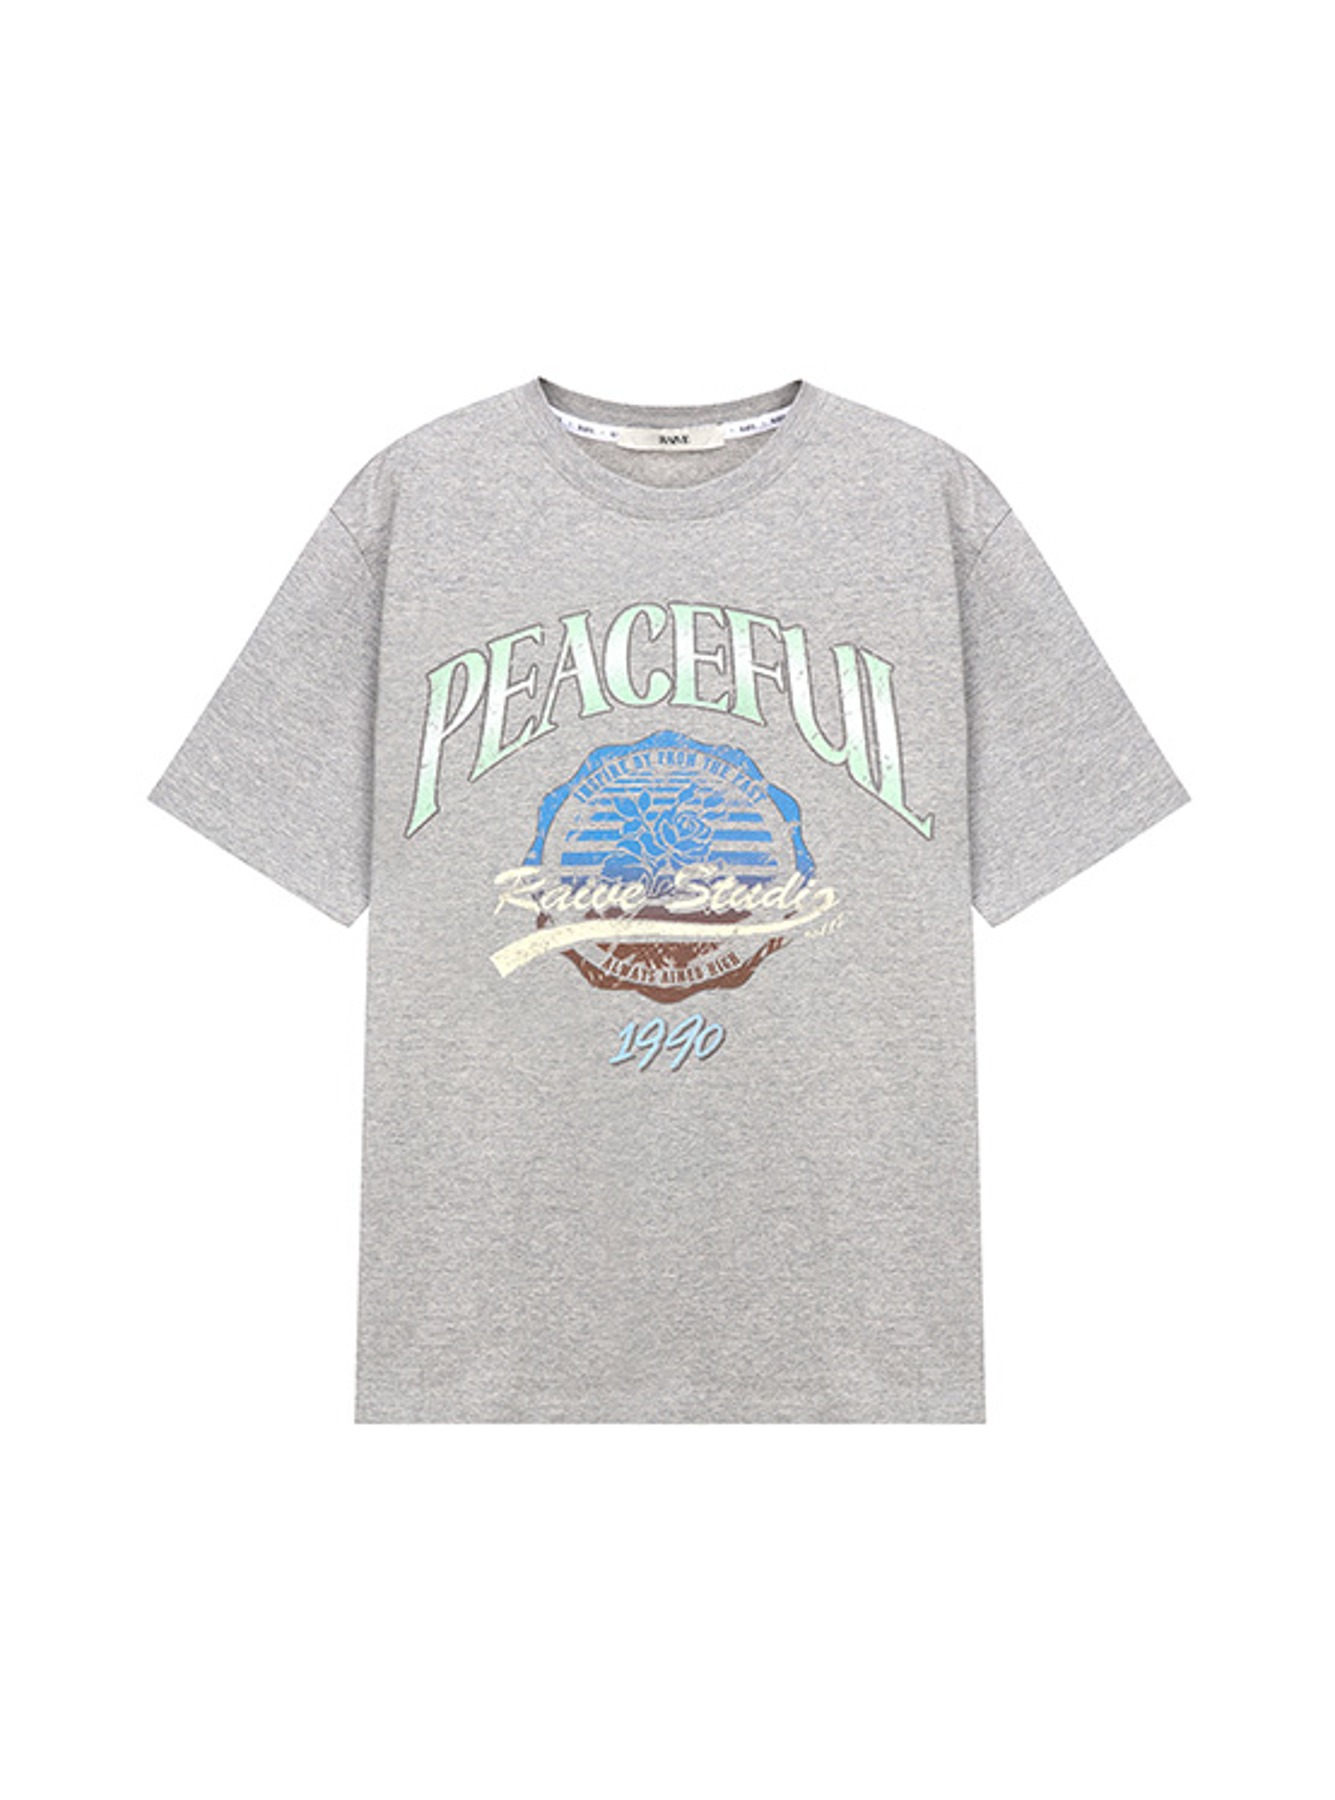 PEACEFUL Graphic T-Shirt in Grey VW4SE026-12